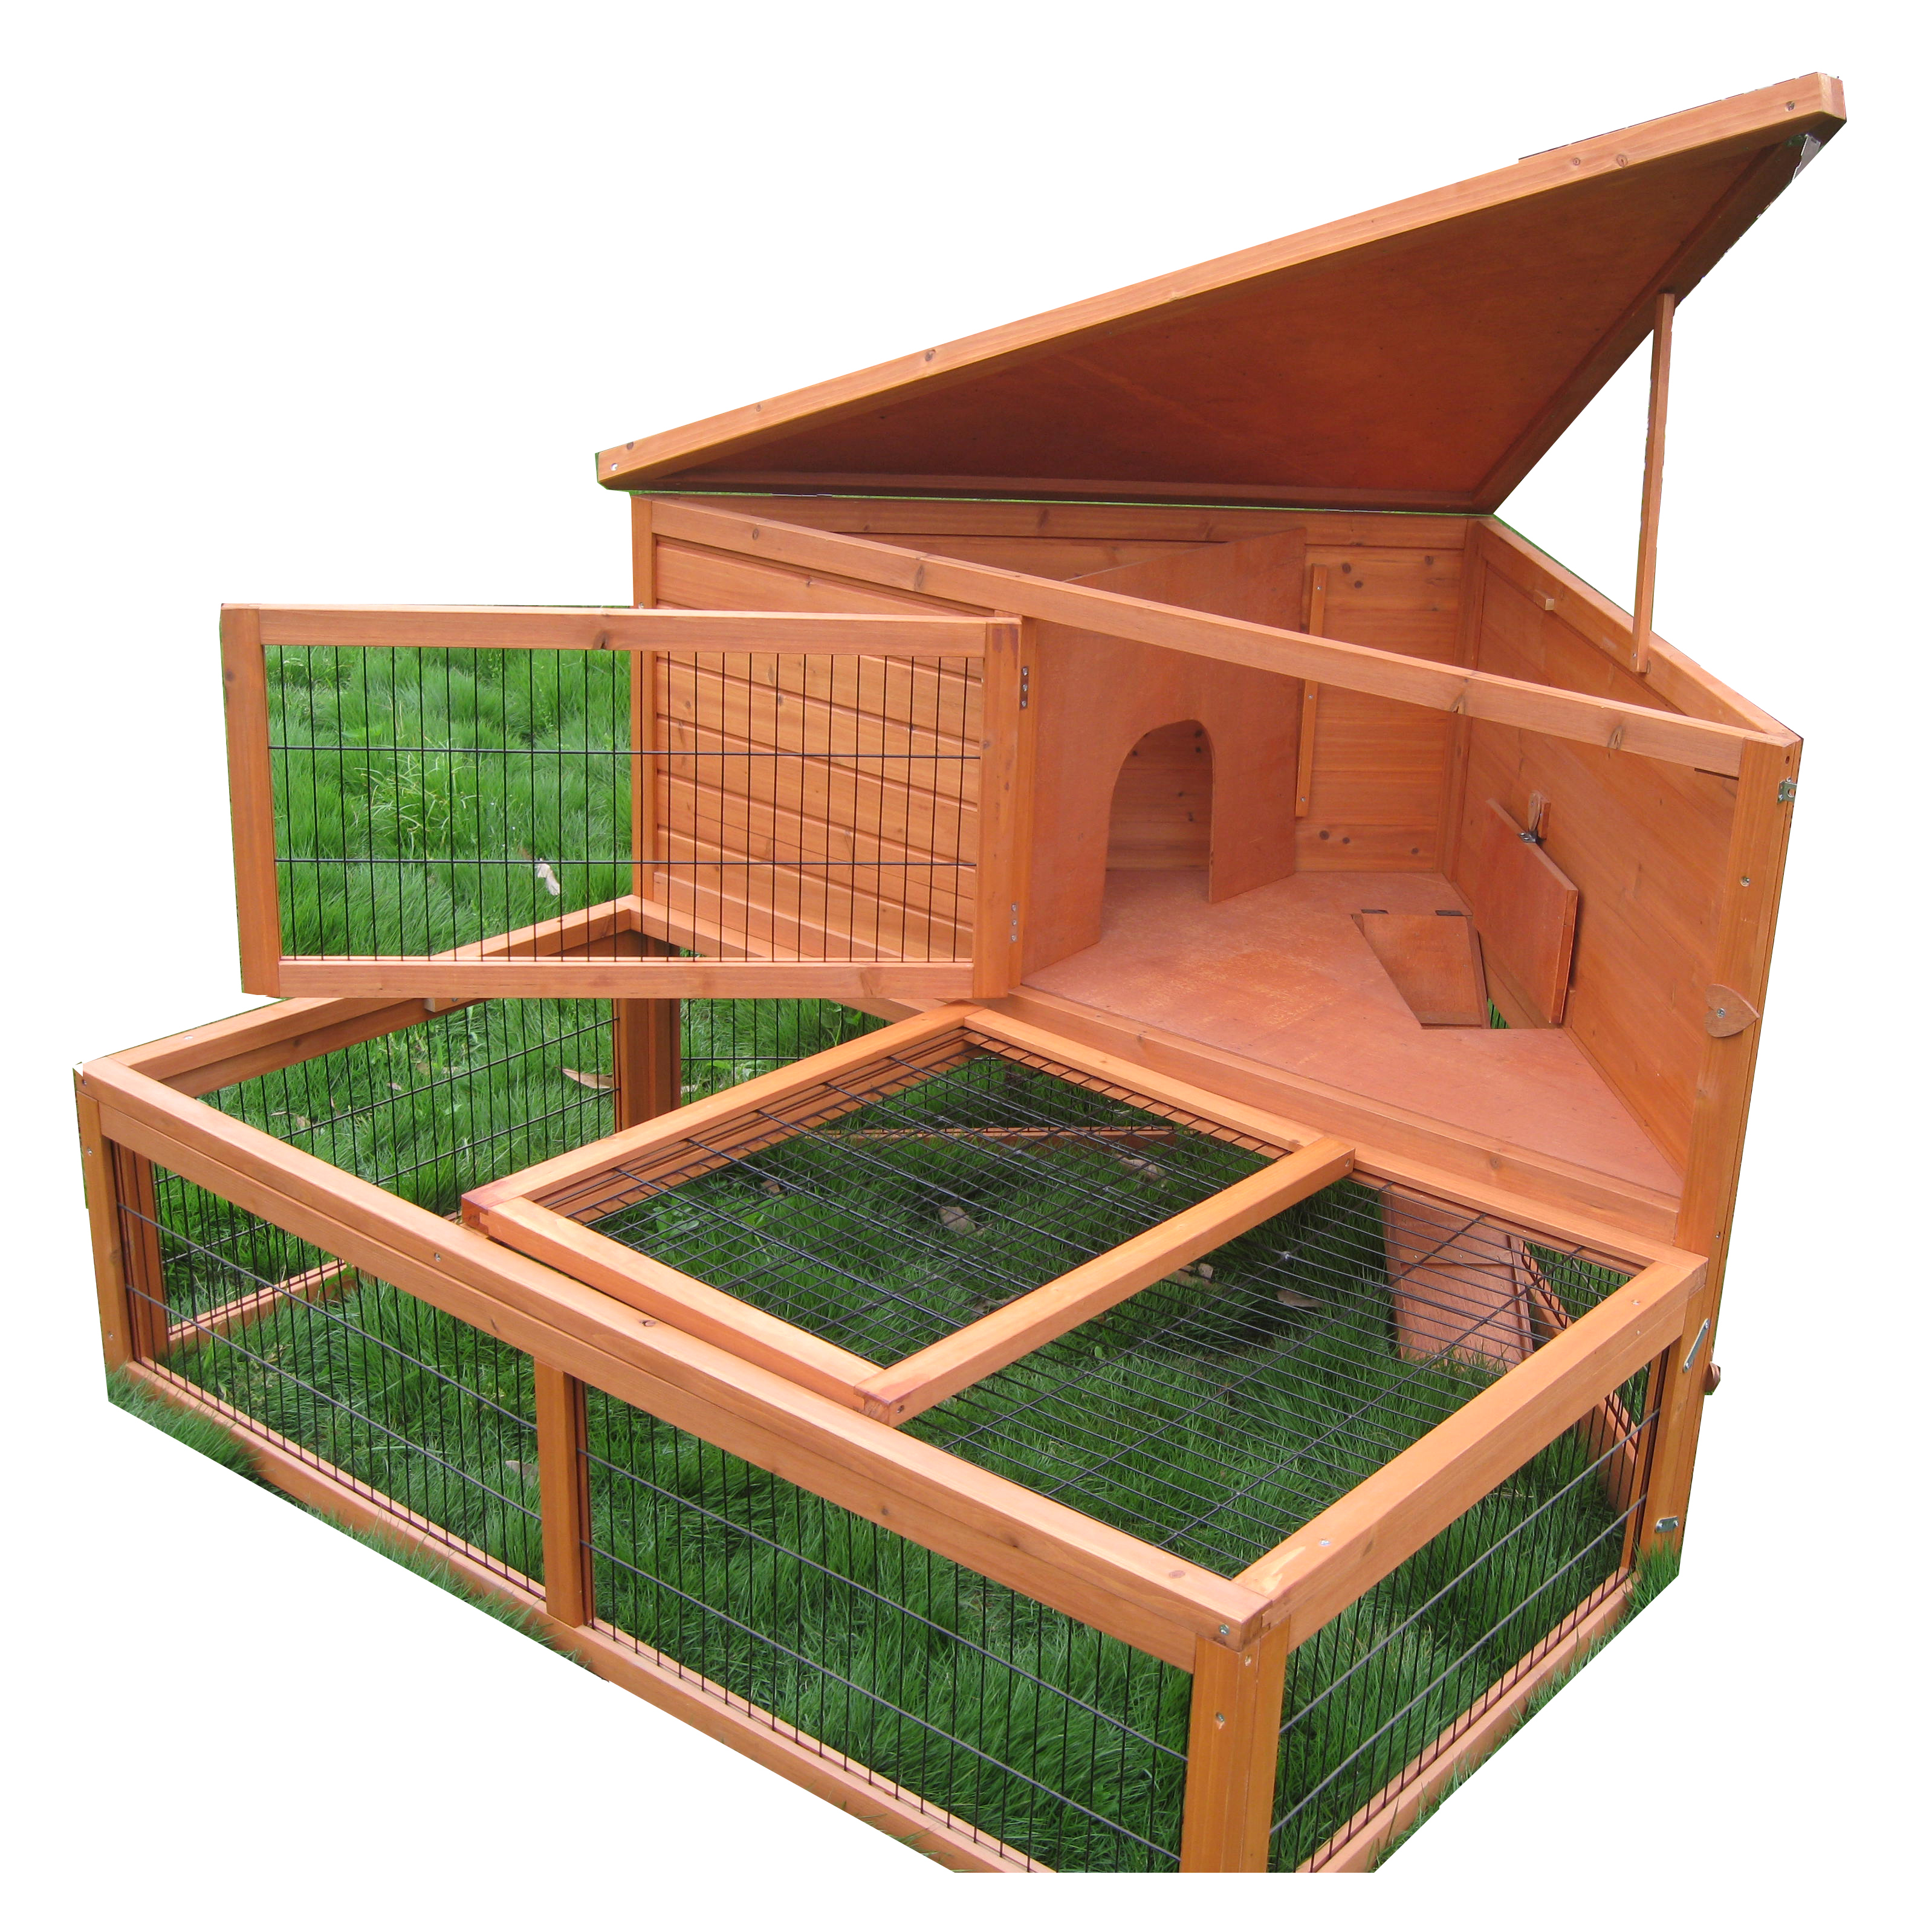 Special Price for Flat Pack Chicken Coop -
 Factory custom Hideaway Guinea Pig Small Animal Fun Xxl Cage pet Rodent Wood 2 Floor Wooden Rabbit Hutch – Easy